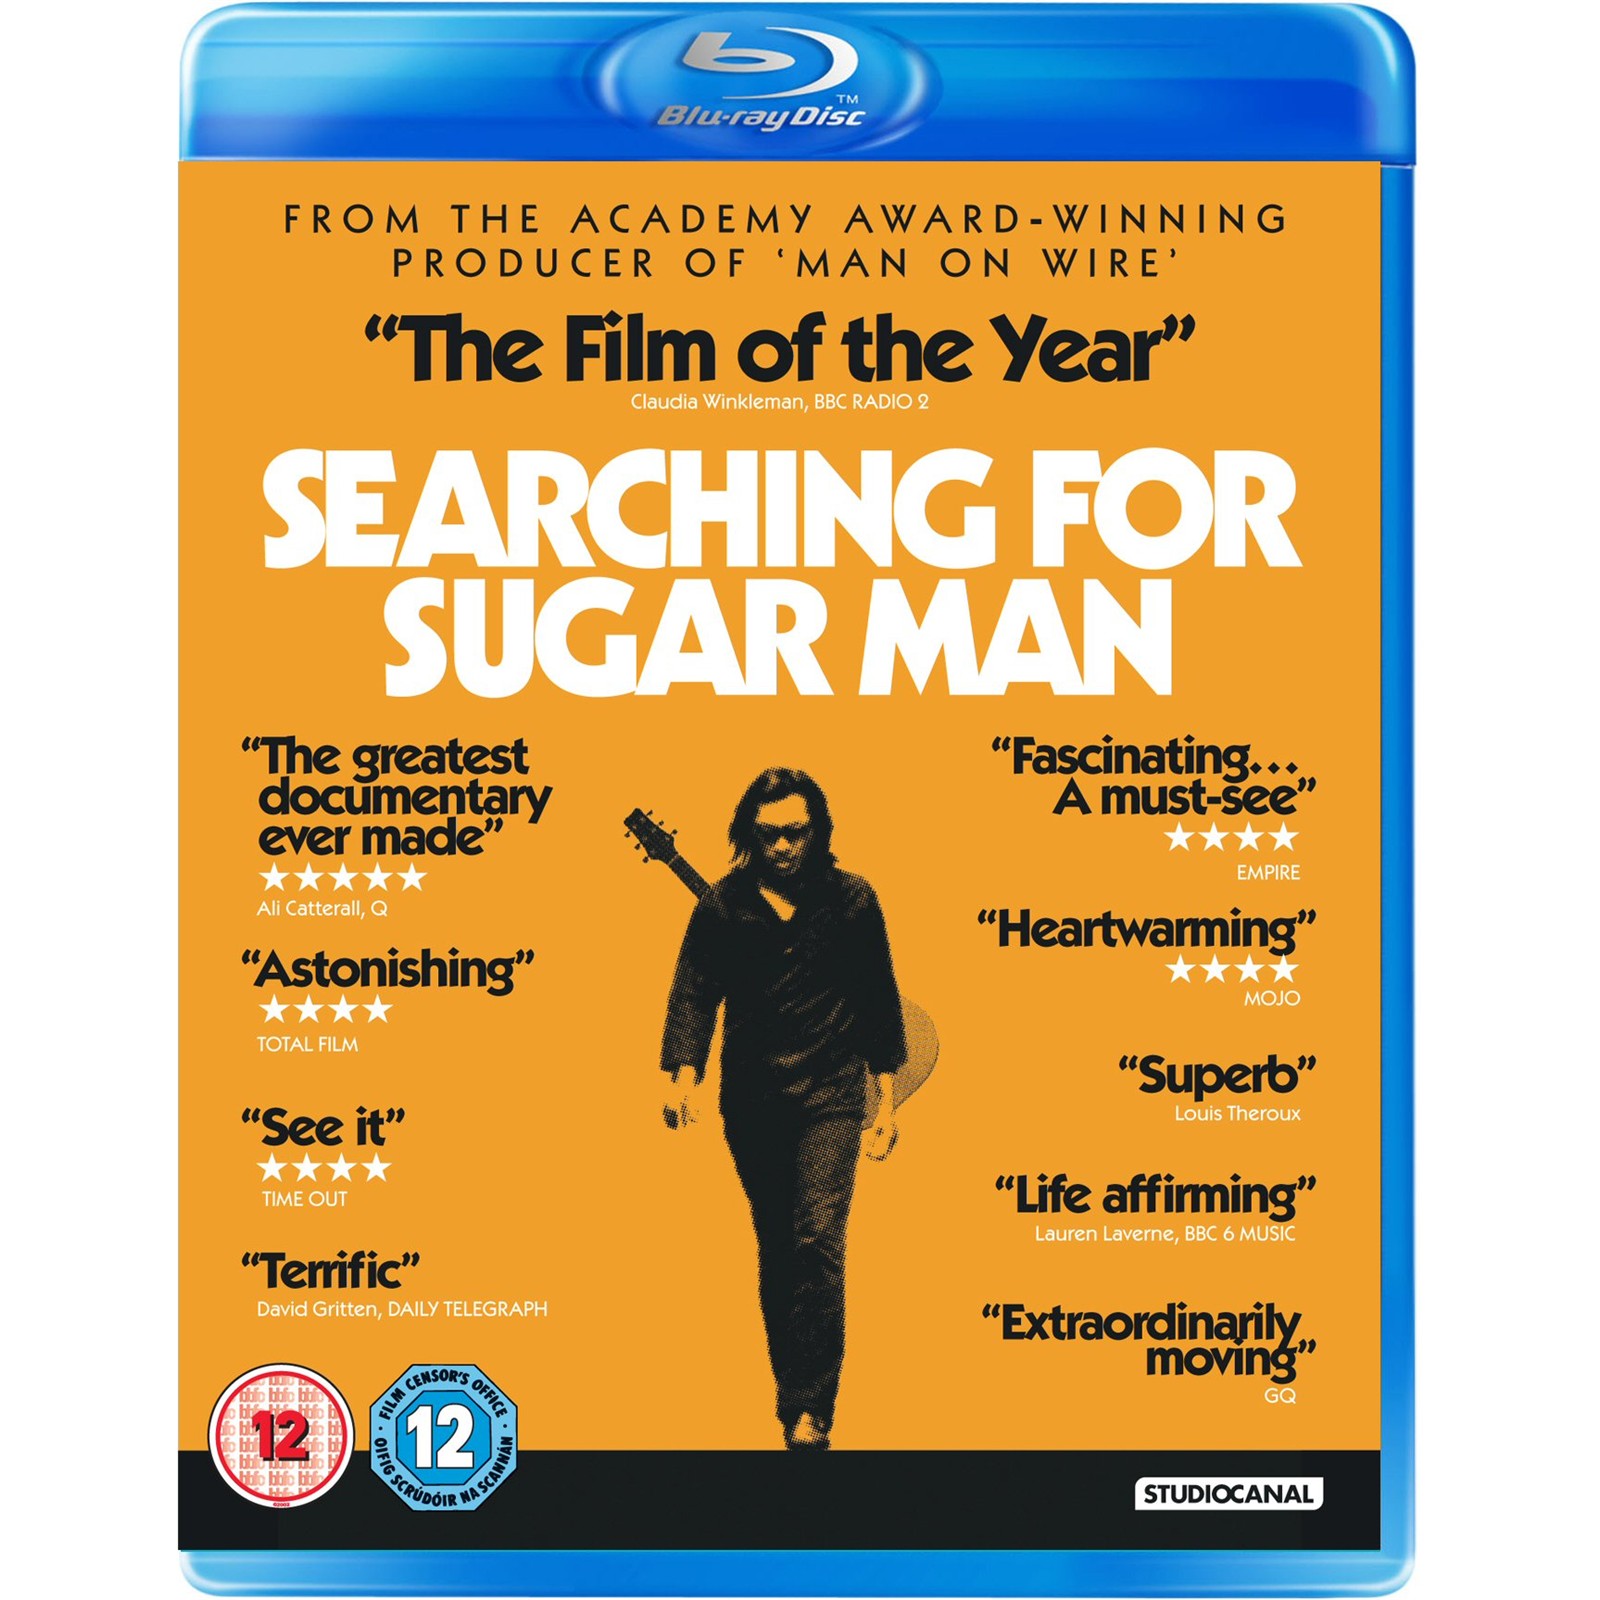 Searching For Sugar Man Soundtrack Review